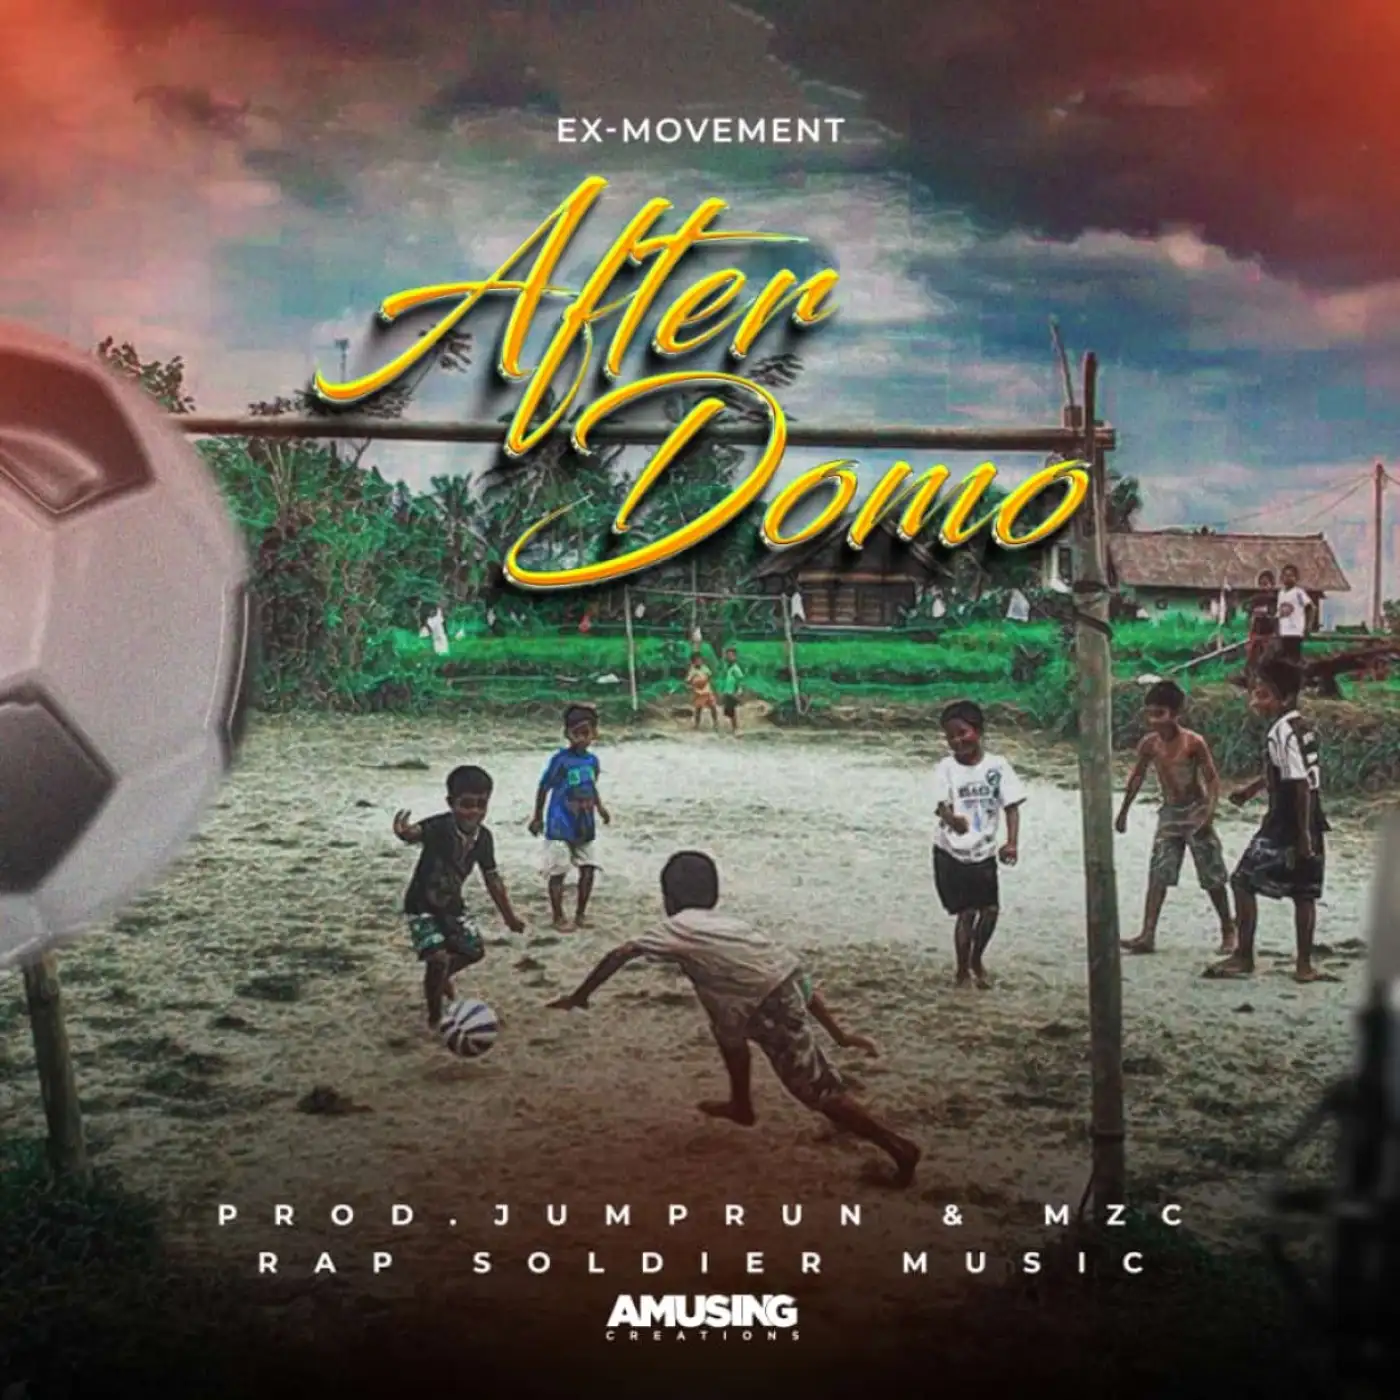 Ex-Movement-Ex-Movement - After Domo (Prod. Jumprun & Mzc)-song artwork cover